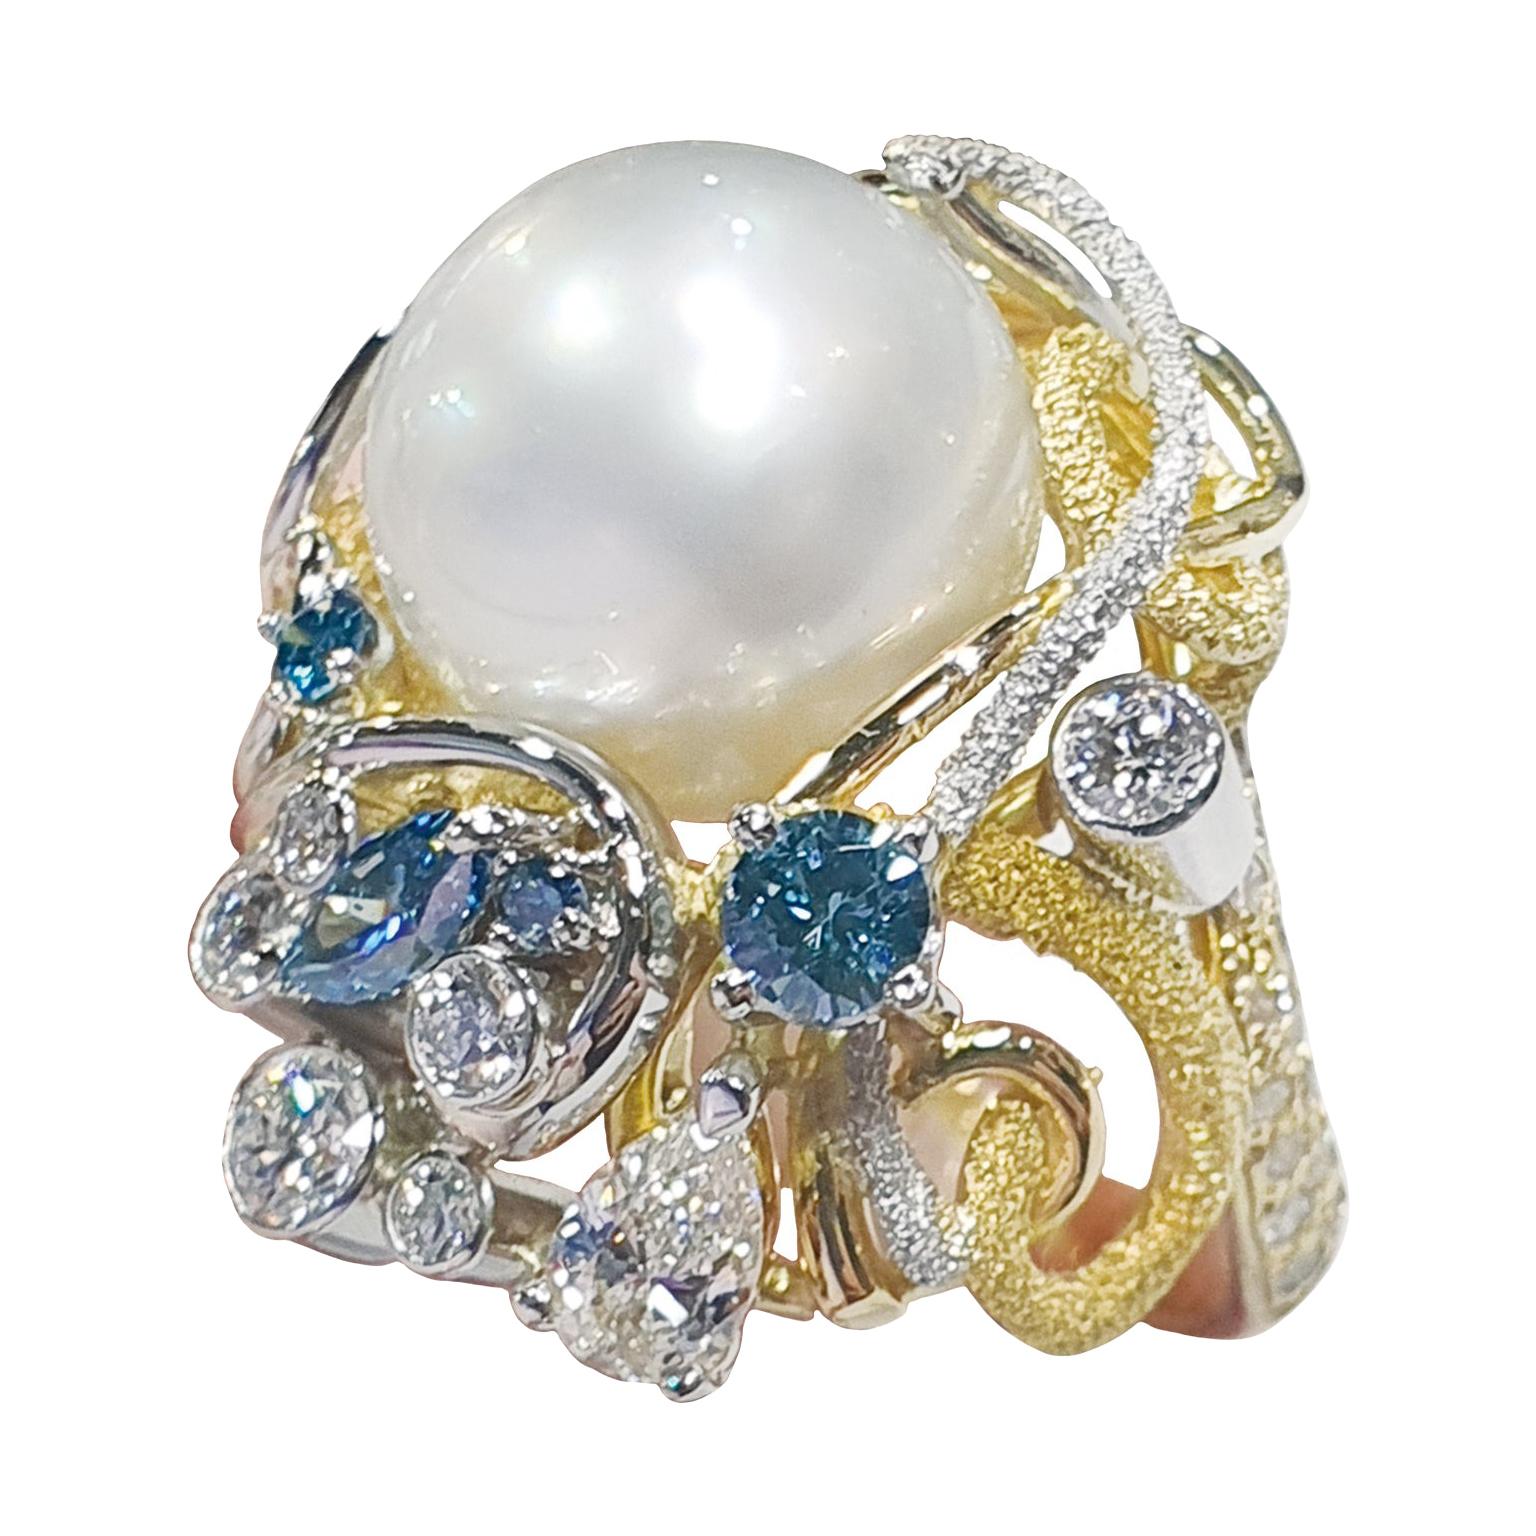 Paul Amey 18k Gold, Pearl and Diamond Cocktail Ring